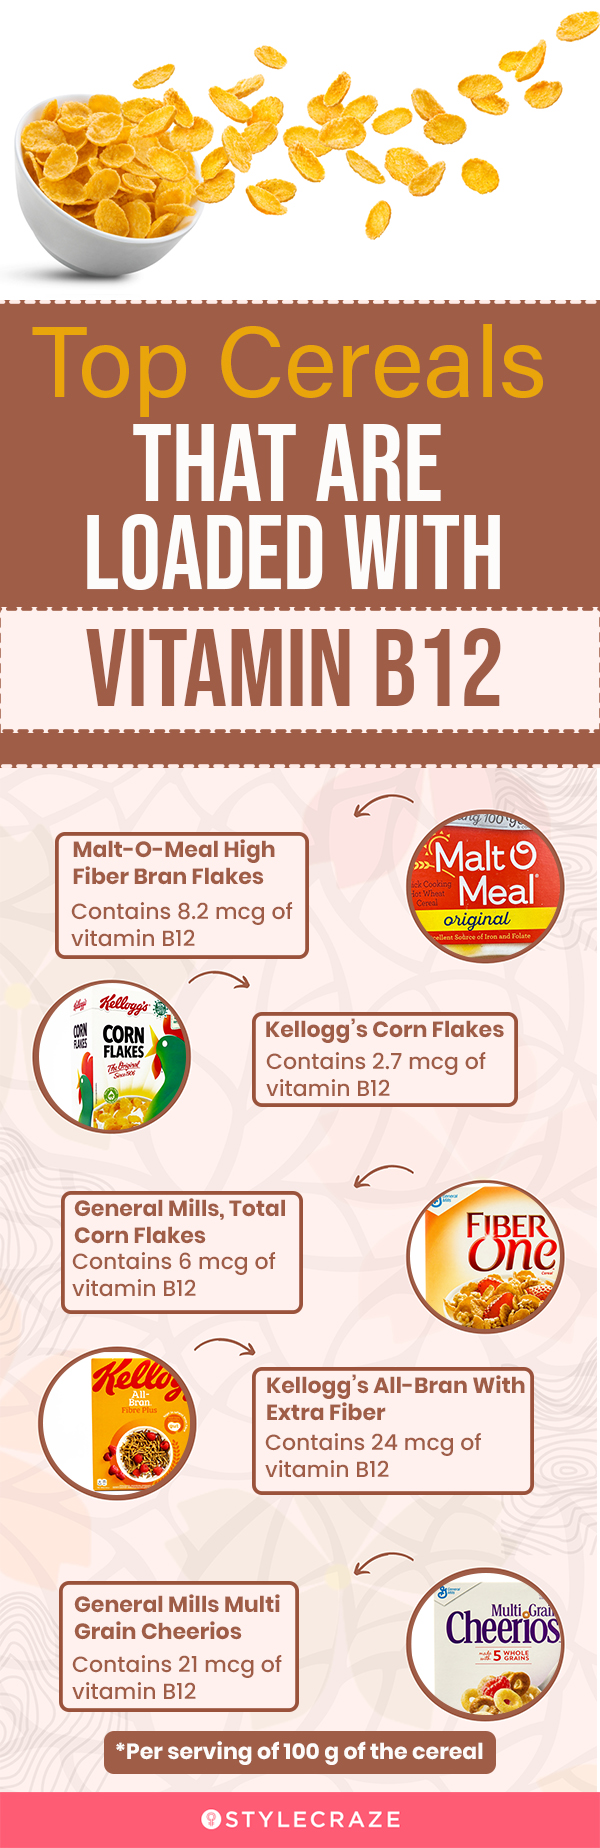 top cereals that are loaded with vitamin b12 (infographic)